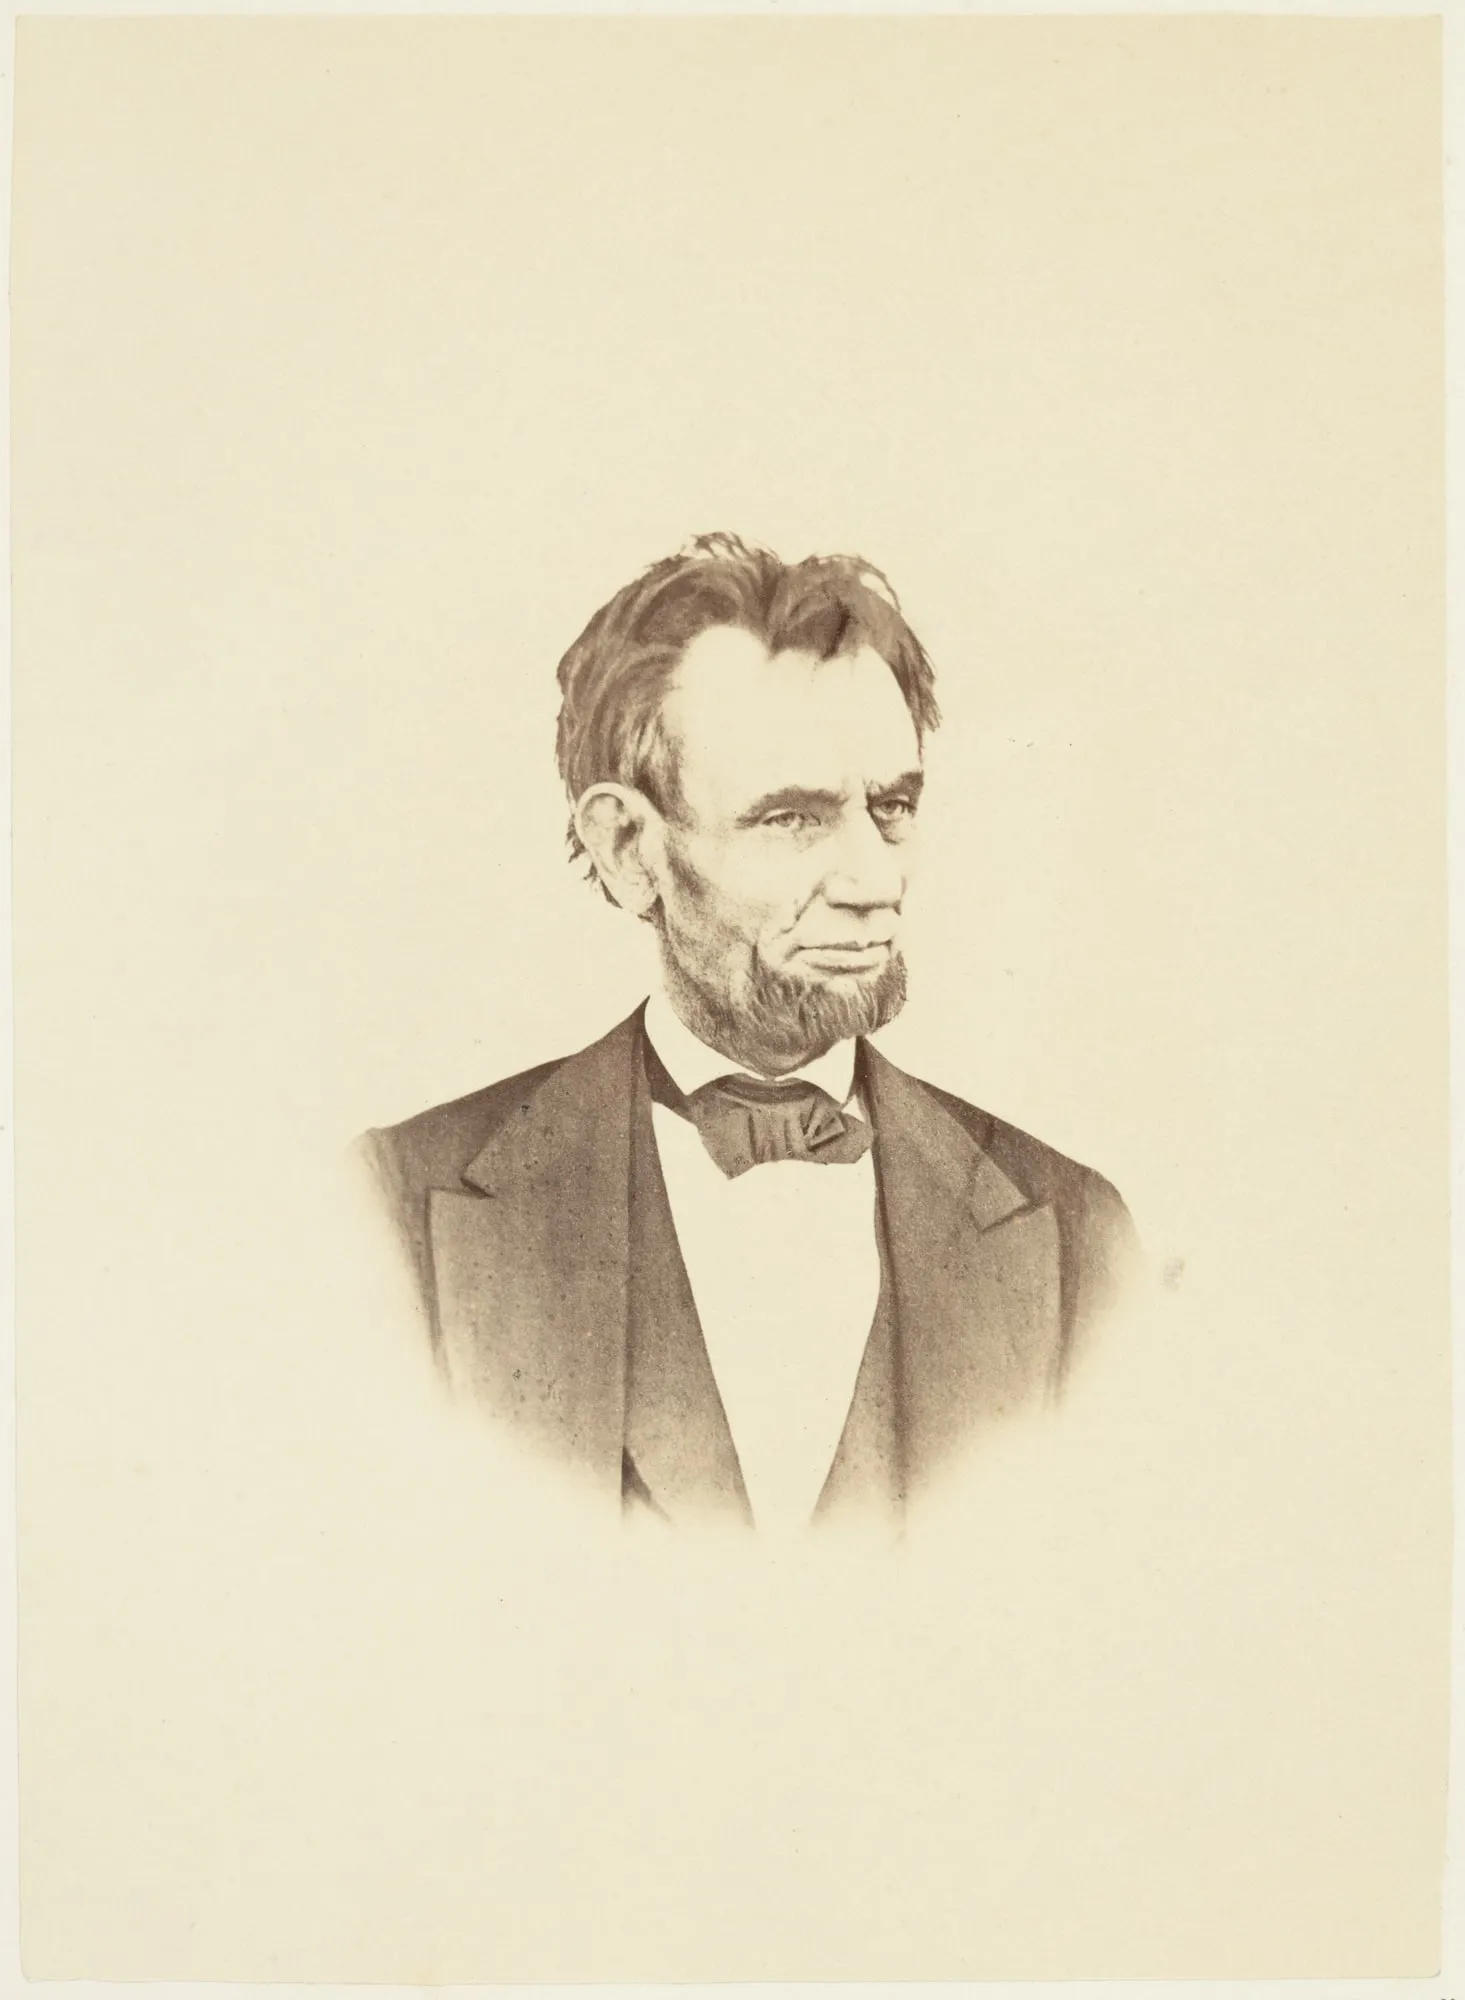 Henry F. Warren, final photograph of Abraham Lincoln, taken in March 1865 and estimated at $1,000-$1,500 at PBA Galleries.